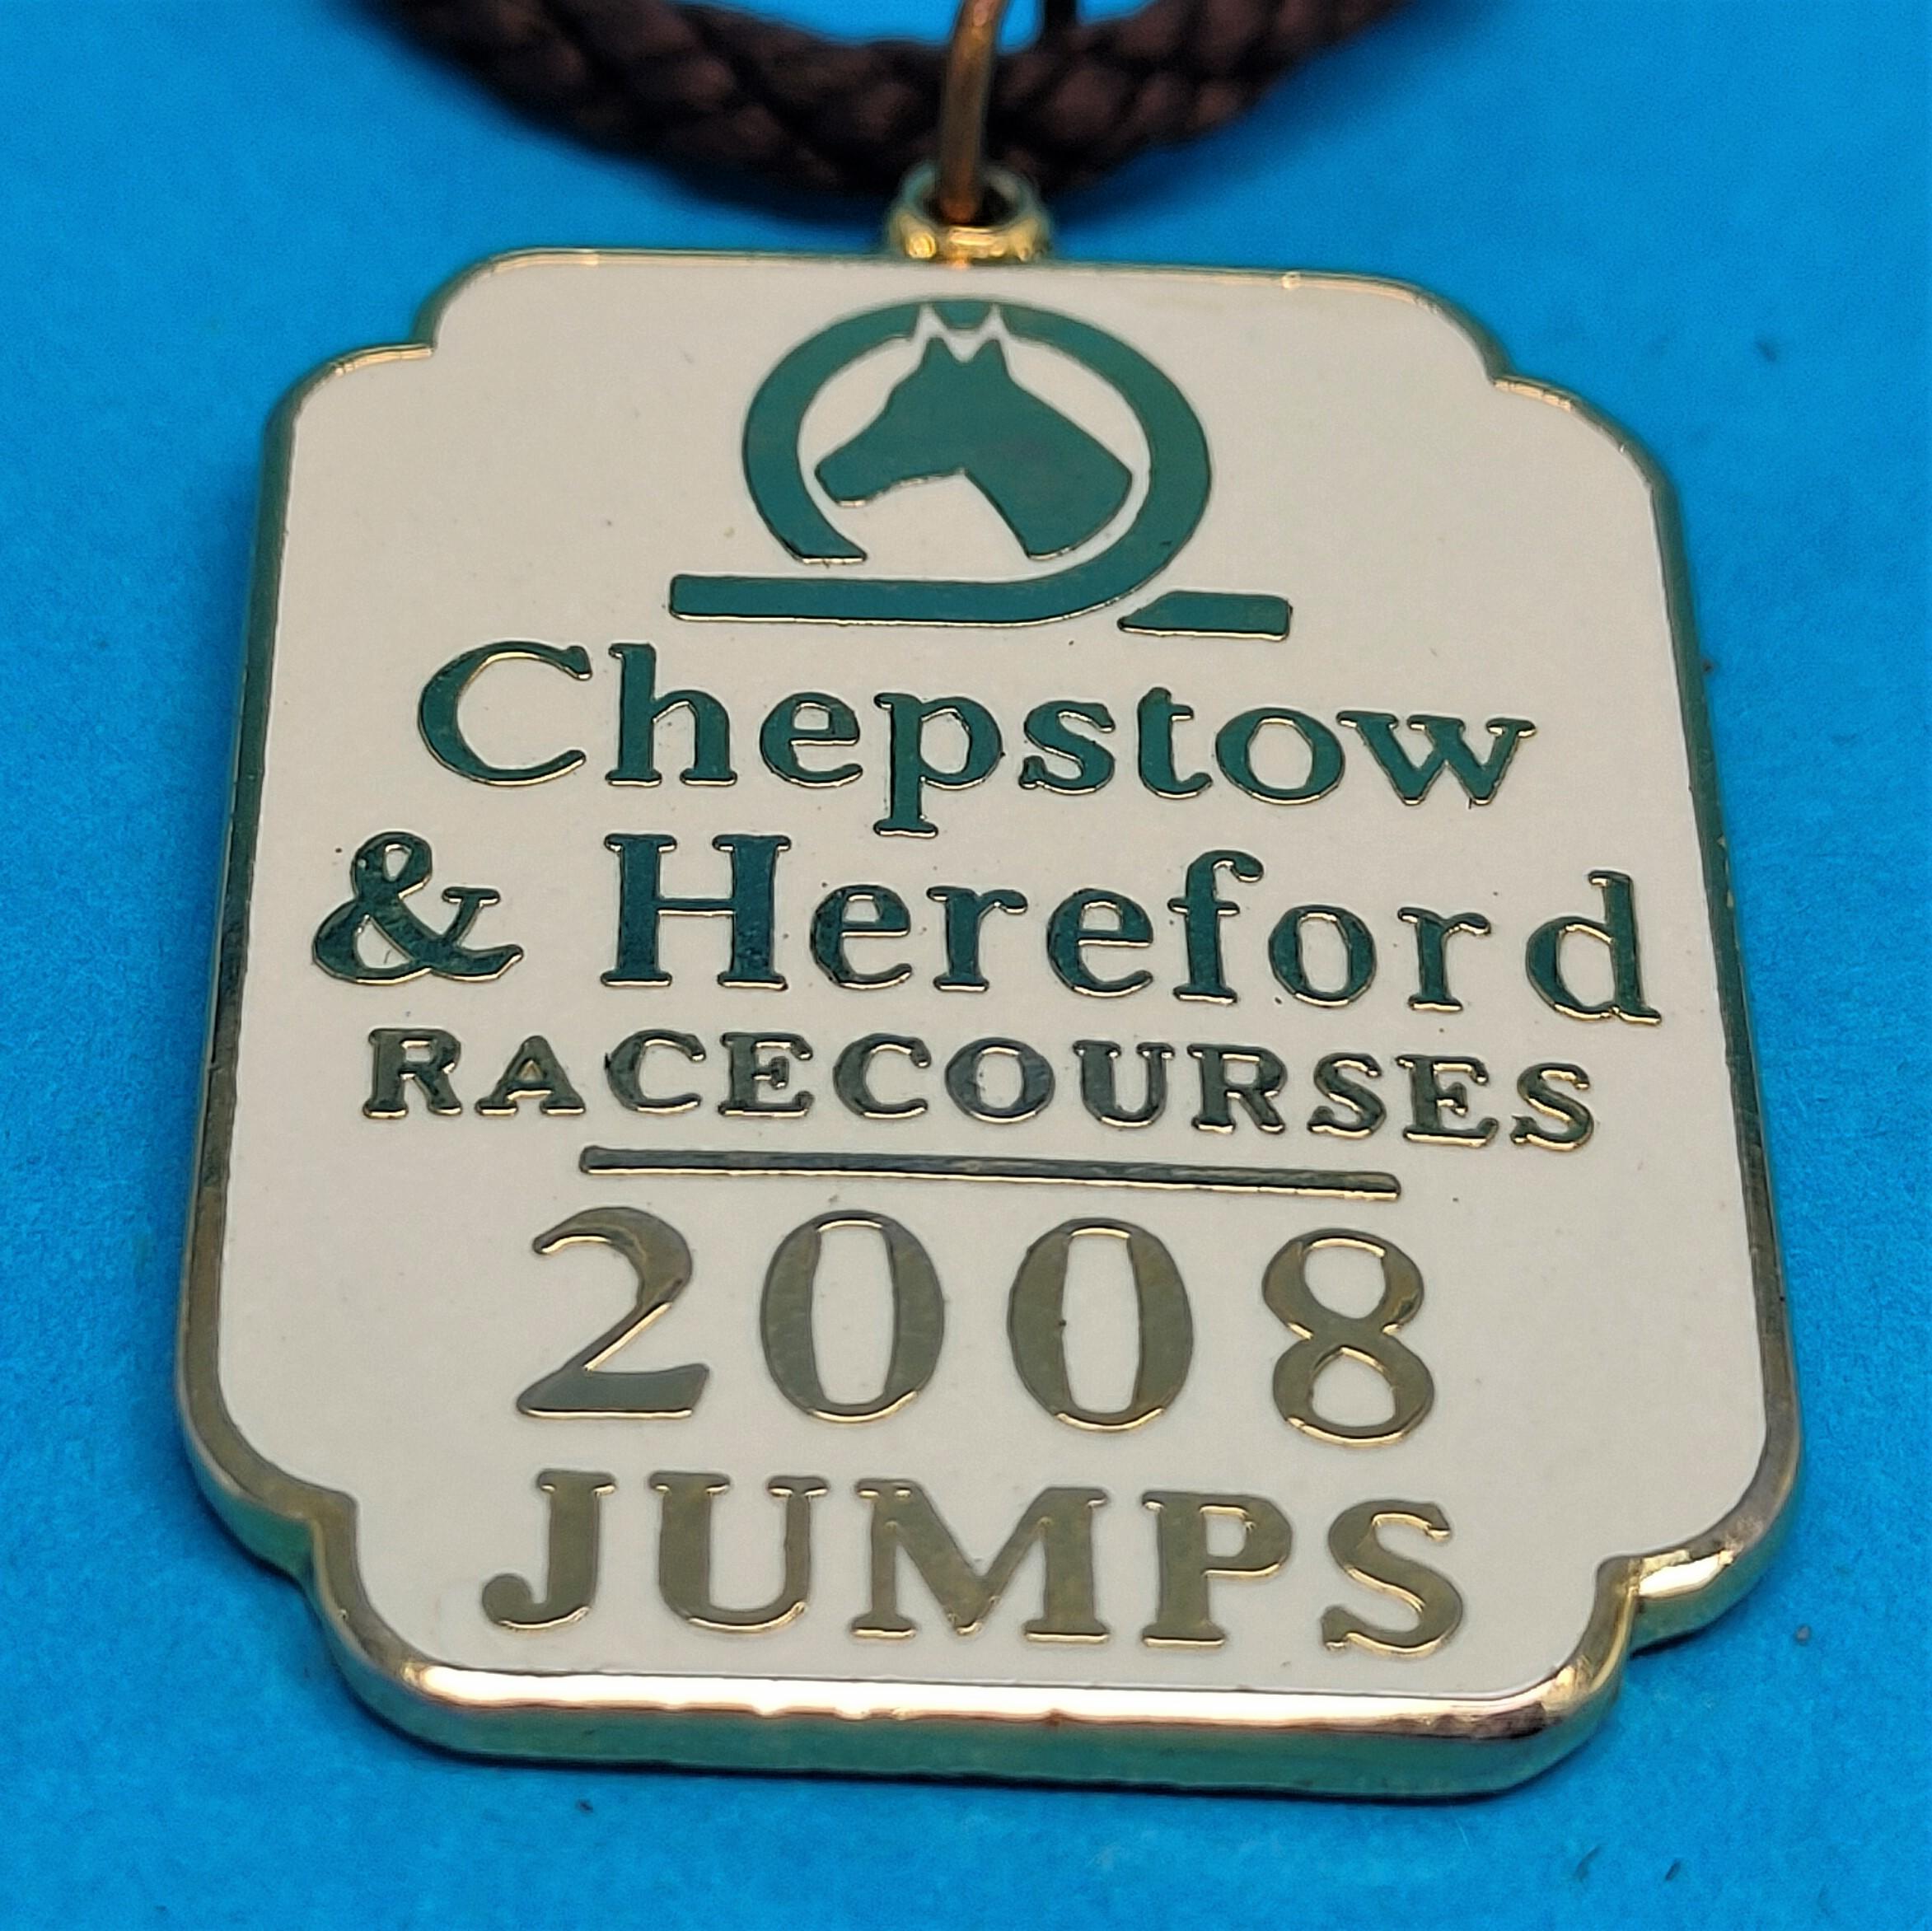 Chepstow and Hereford 2008 Jumps